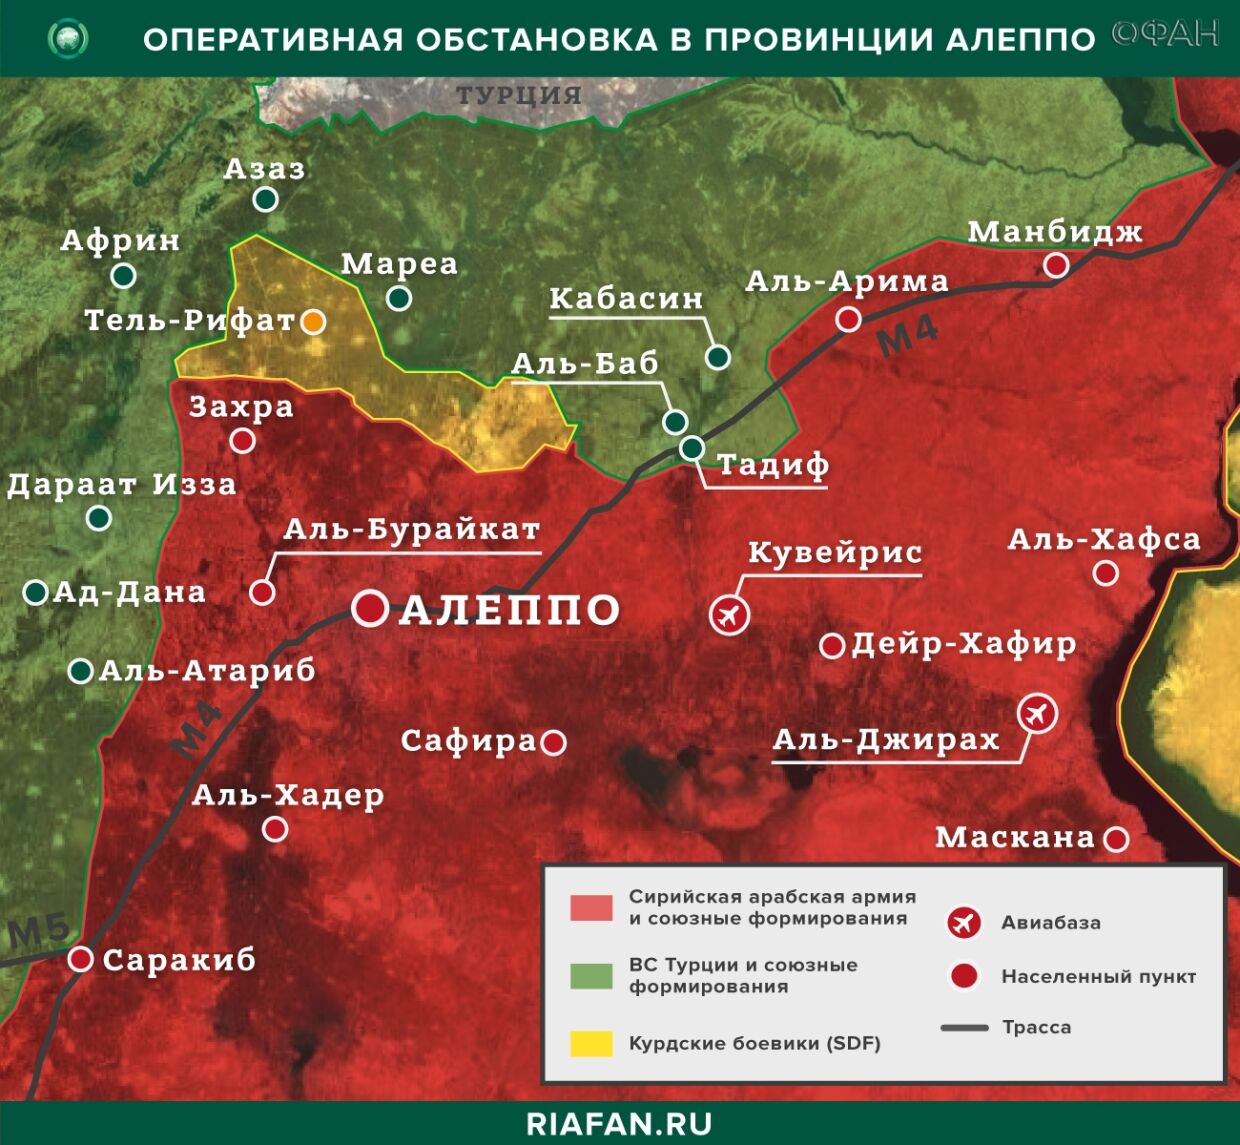 Syria the results of the day on 21 May 06.00: residents suffered during skirmishes of allies of Turkey in Afrin, SAA deployed US convoy in Hasak